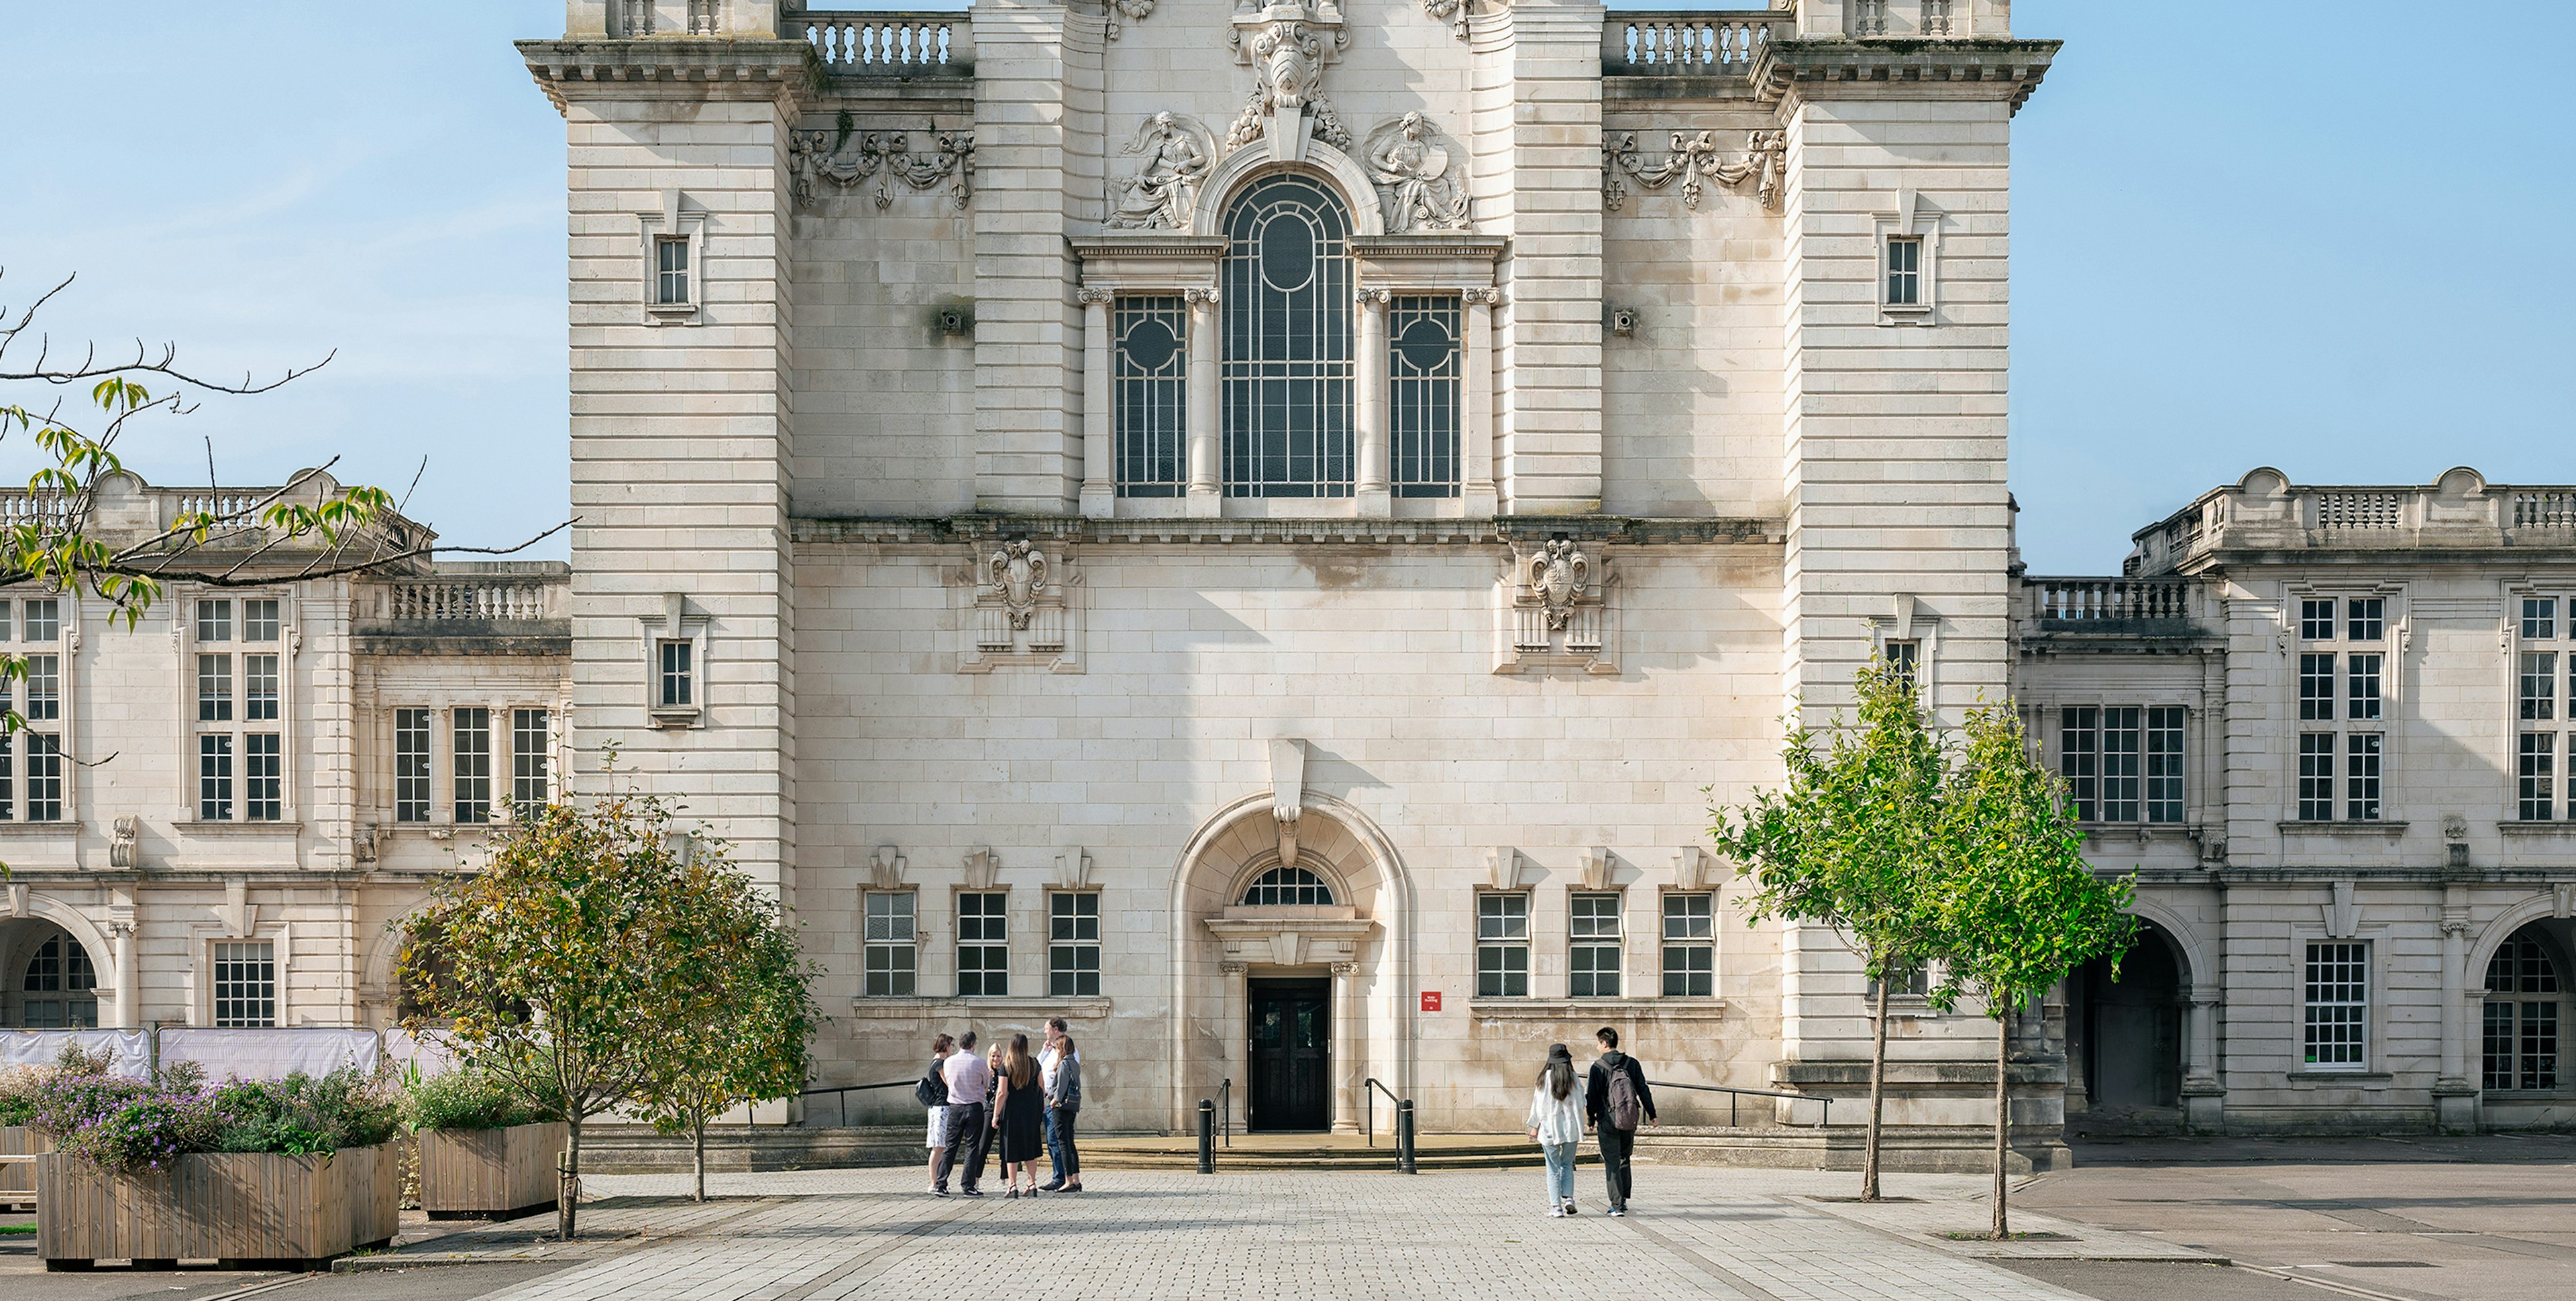 The facade of Cardiff University's main building.